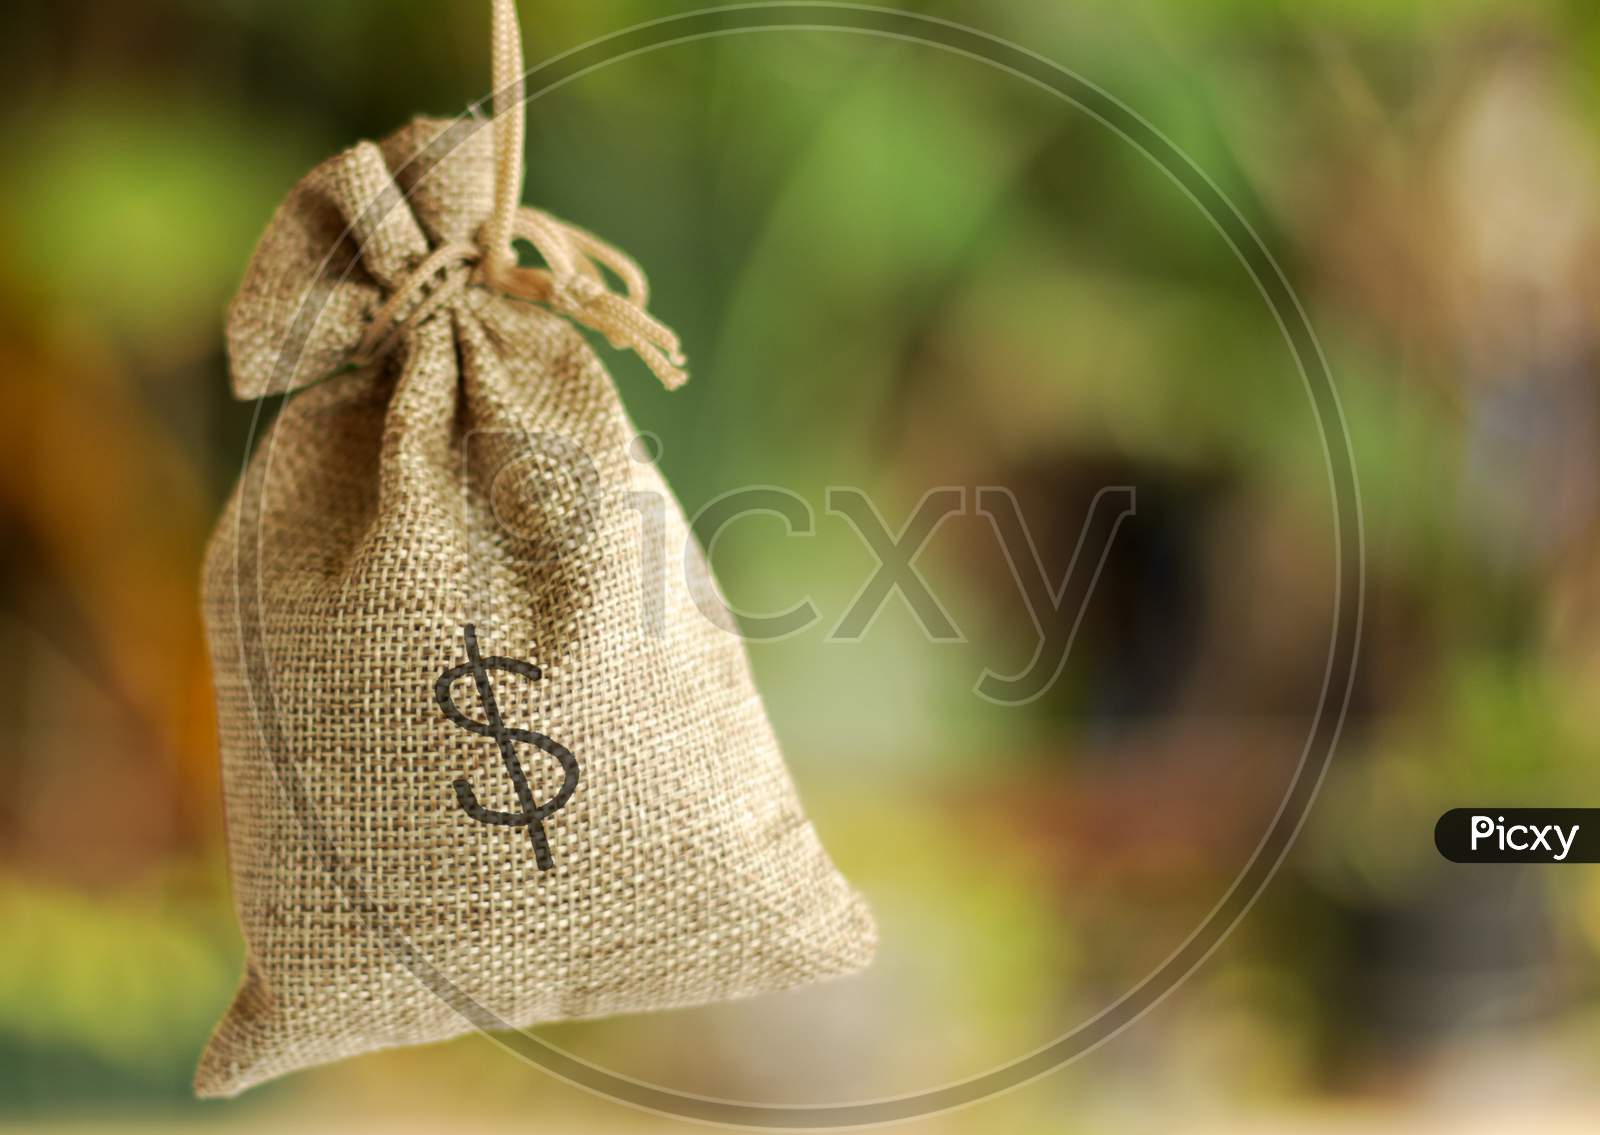 A View Of A Money Bag With Dollar Sign Stock Photo